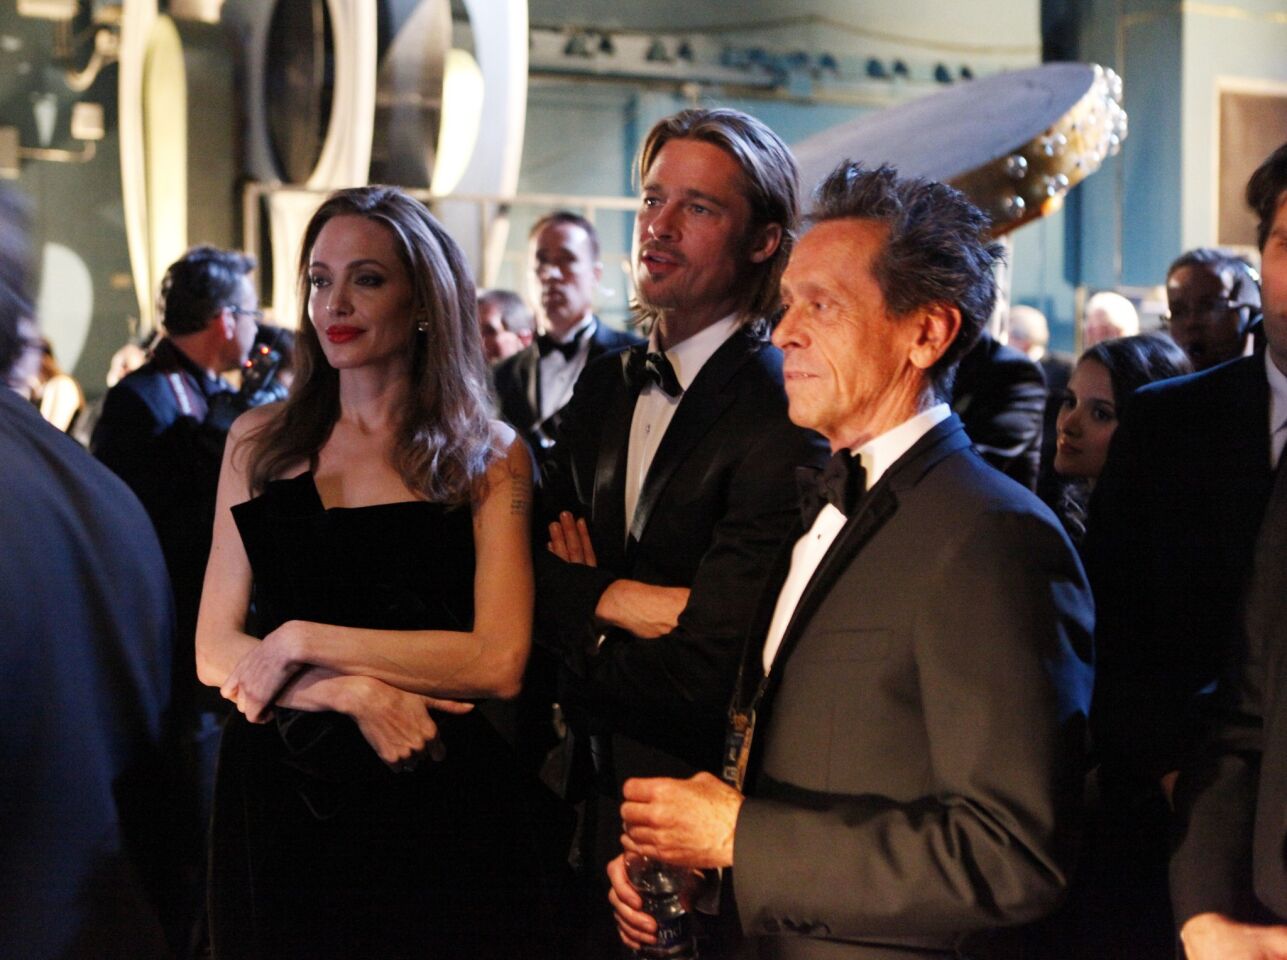 Angelina Jolie, Brad Pitt and Brian Grazer at the 84th Annual Academy Awards show at the Hollywood and Highland Center in Los Angeles on Feb. 26, 2012.